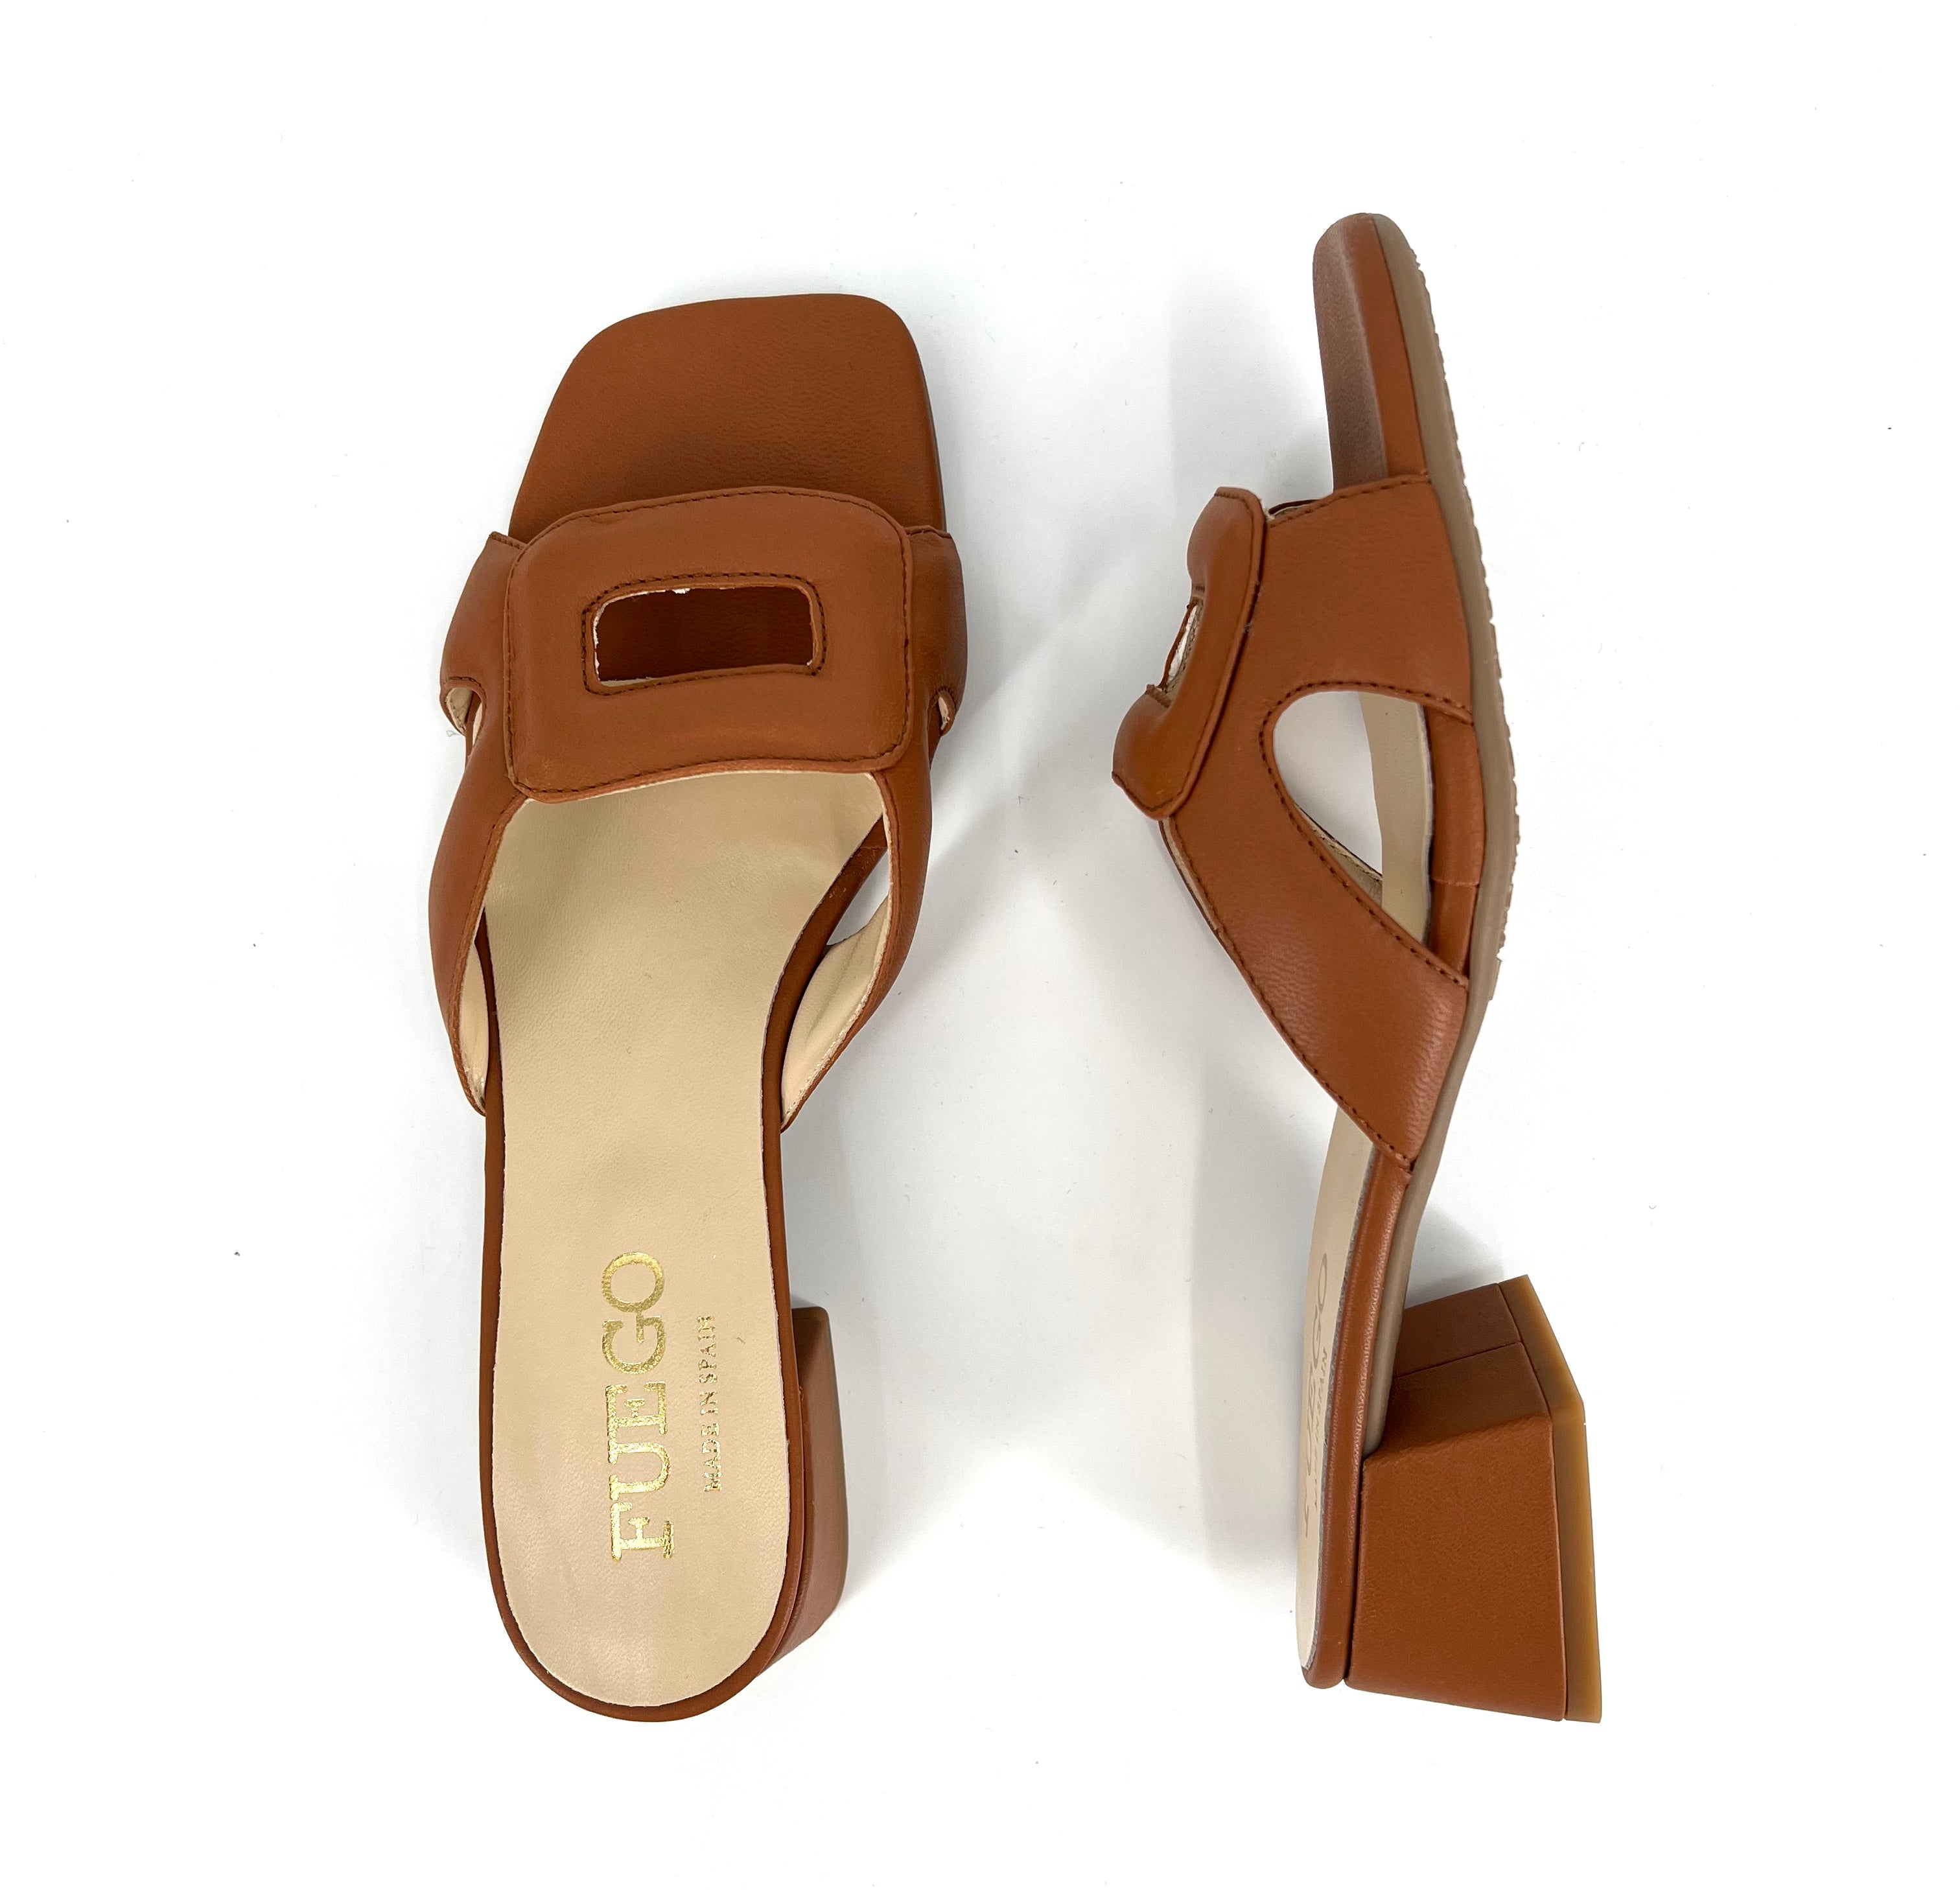 The Rectangle Slide Sandal in Luggage